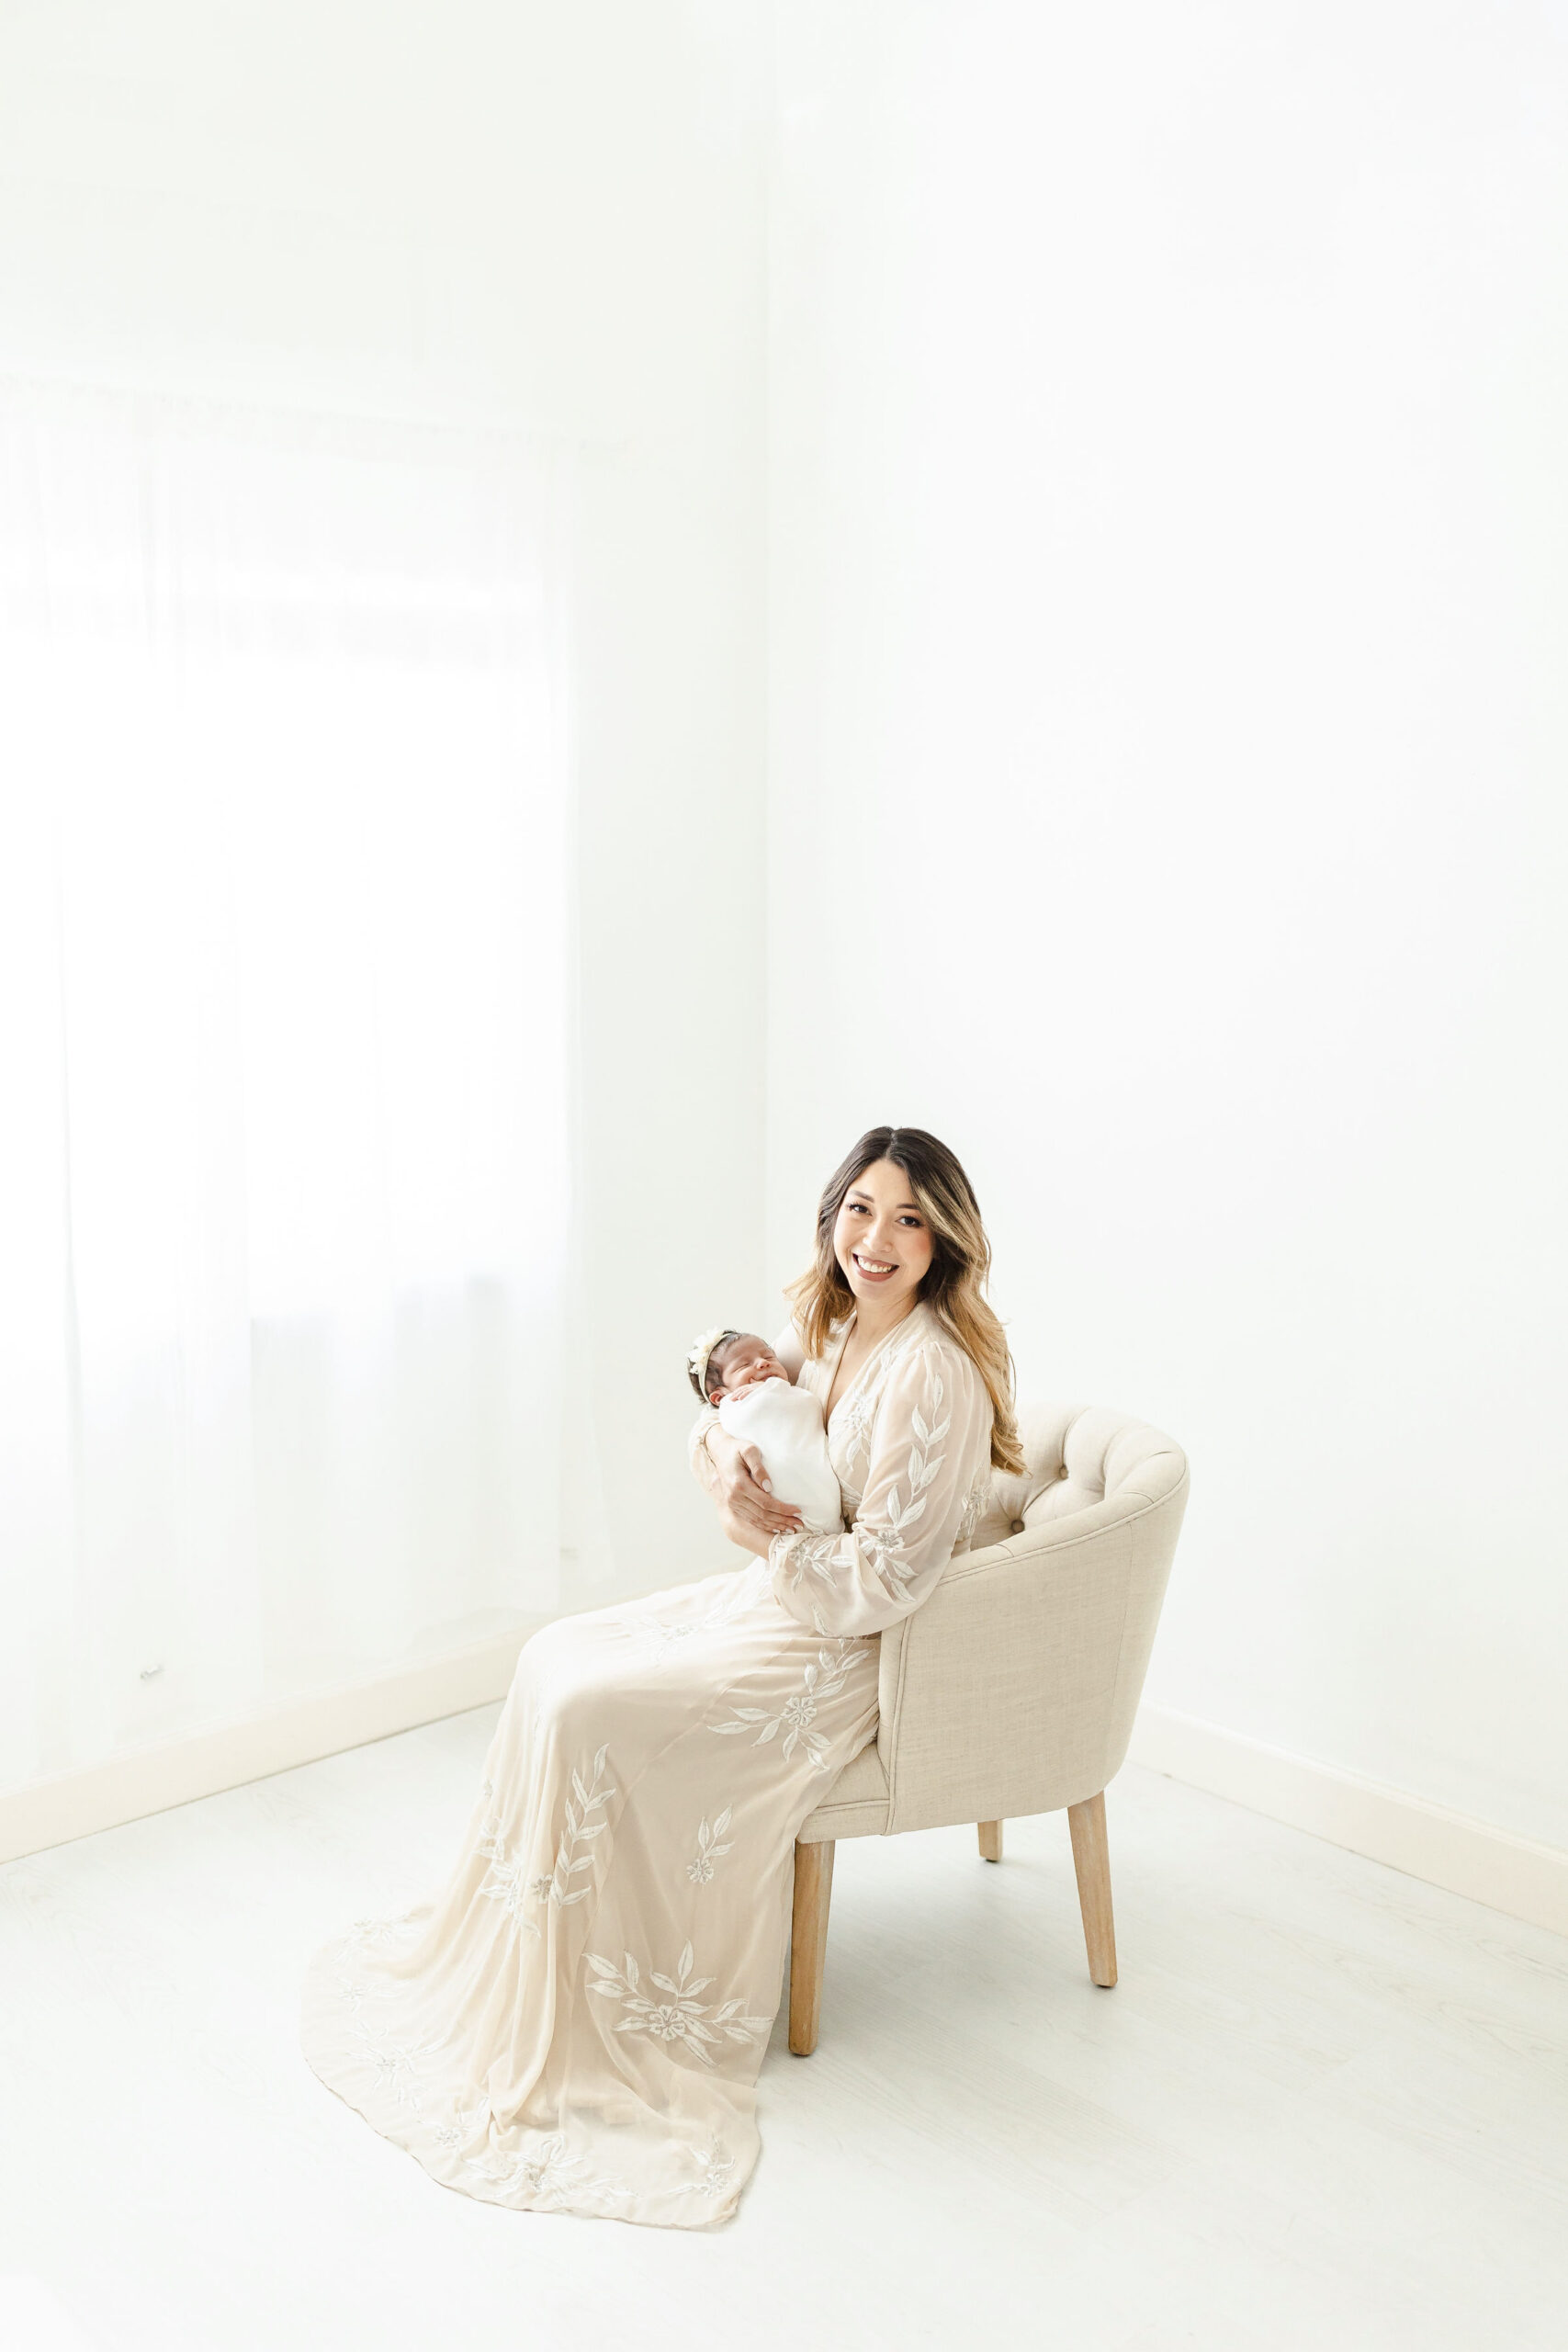 A mother to be sits in the corner of a room in front of a window on a beige chair while holding her newborn daughter